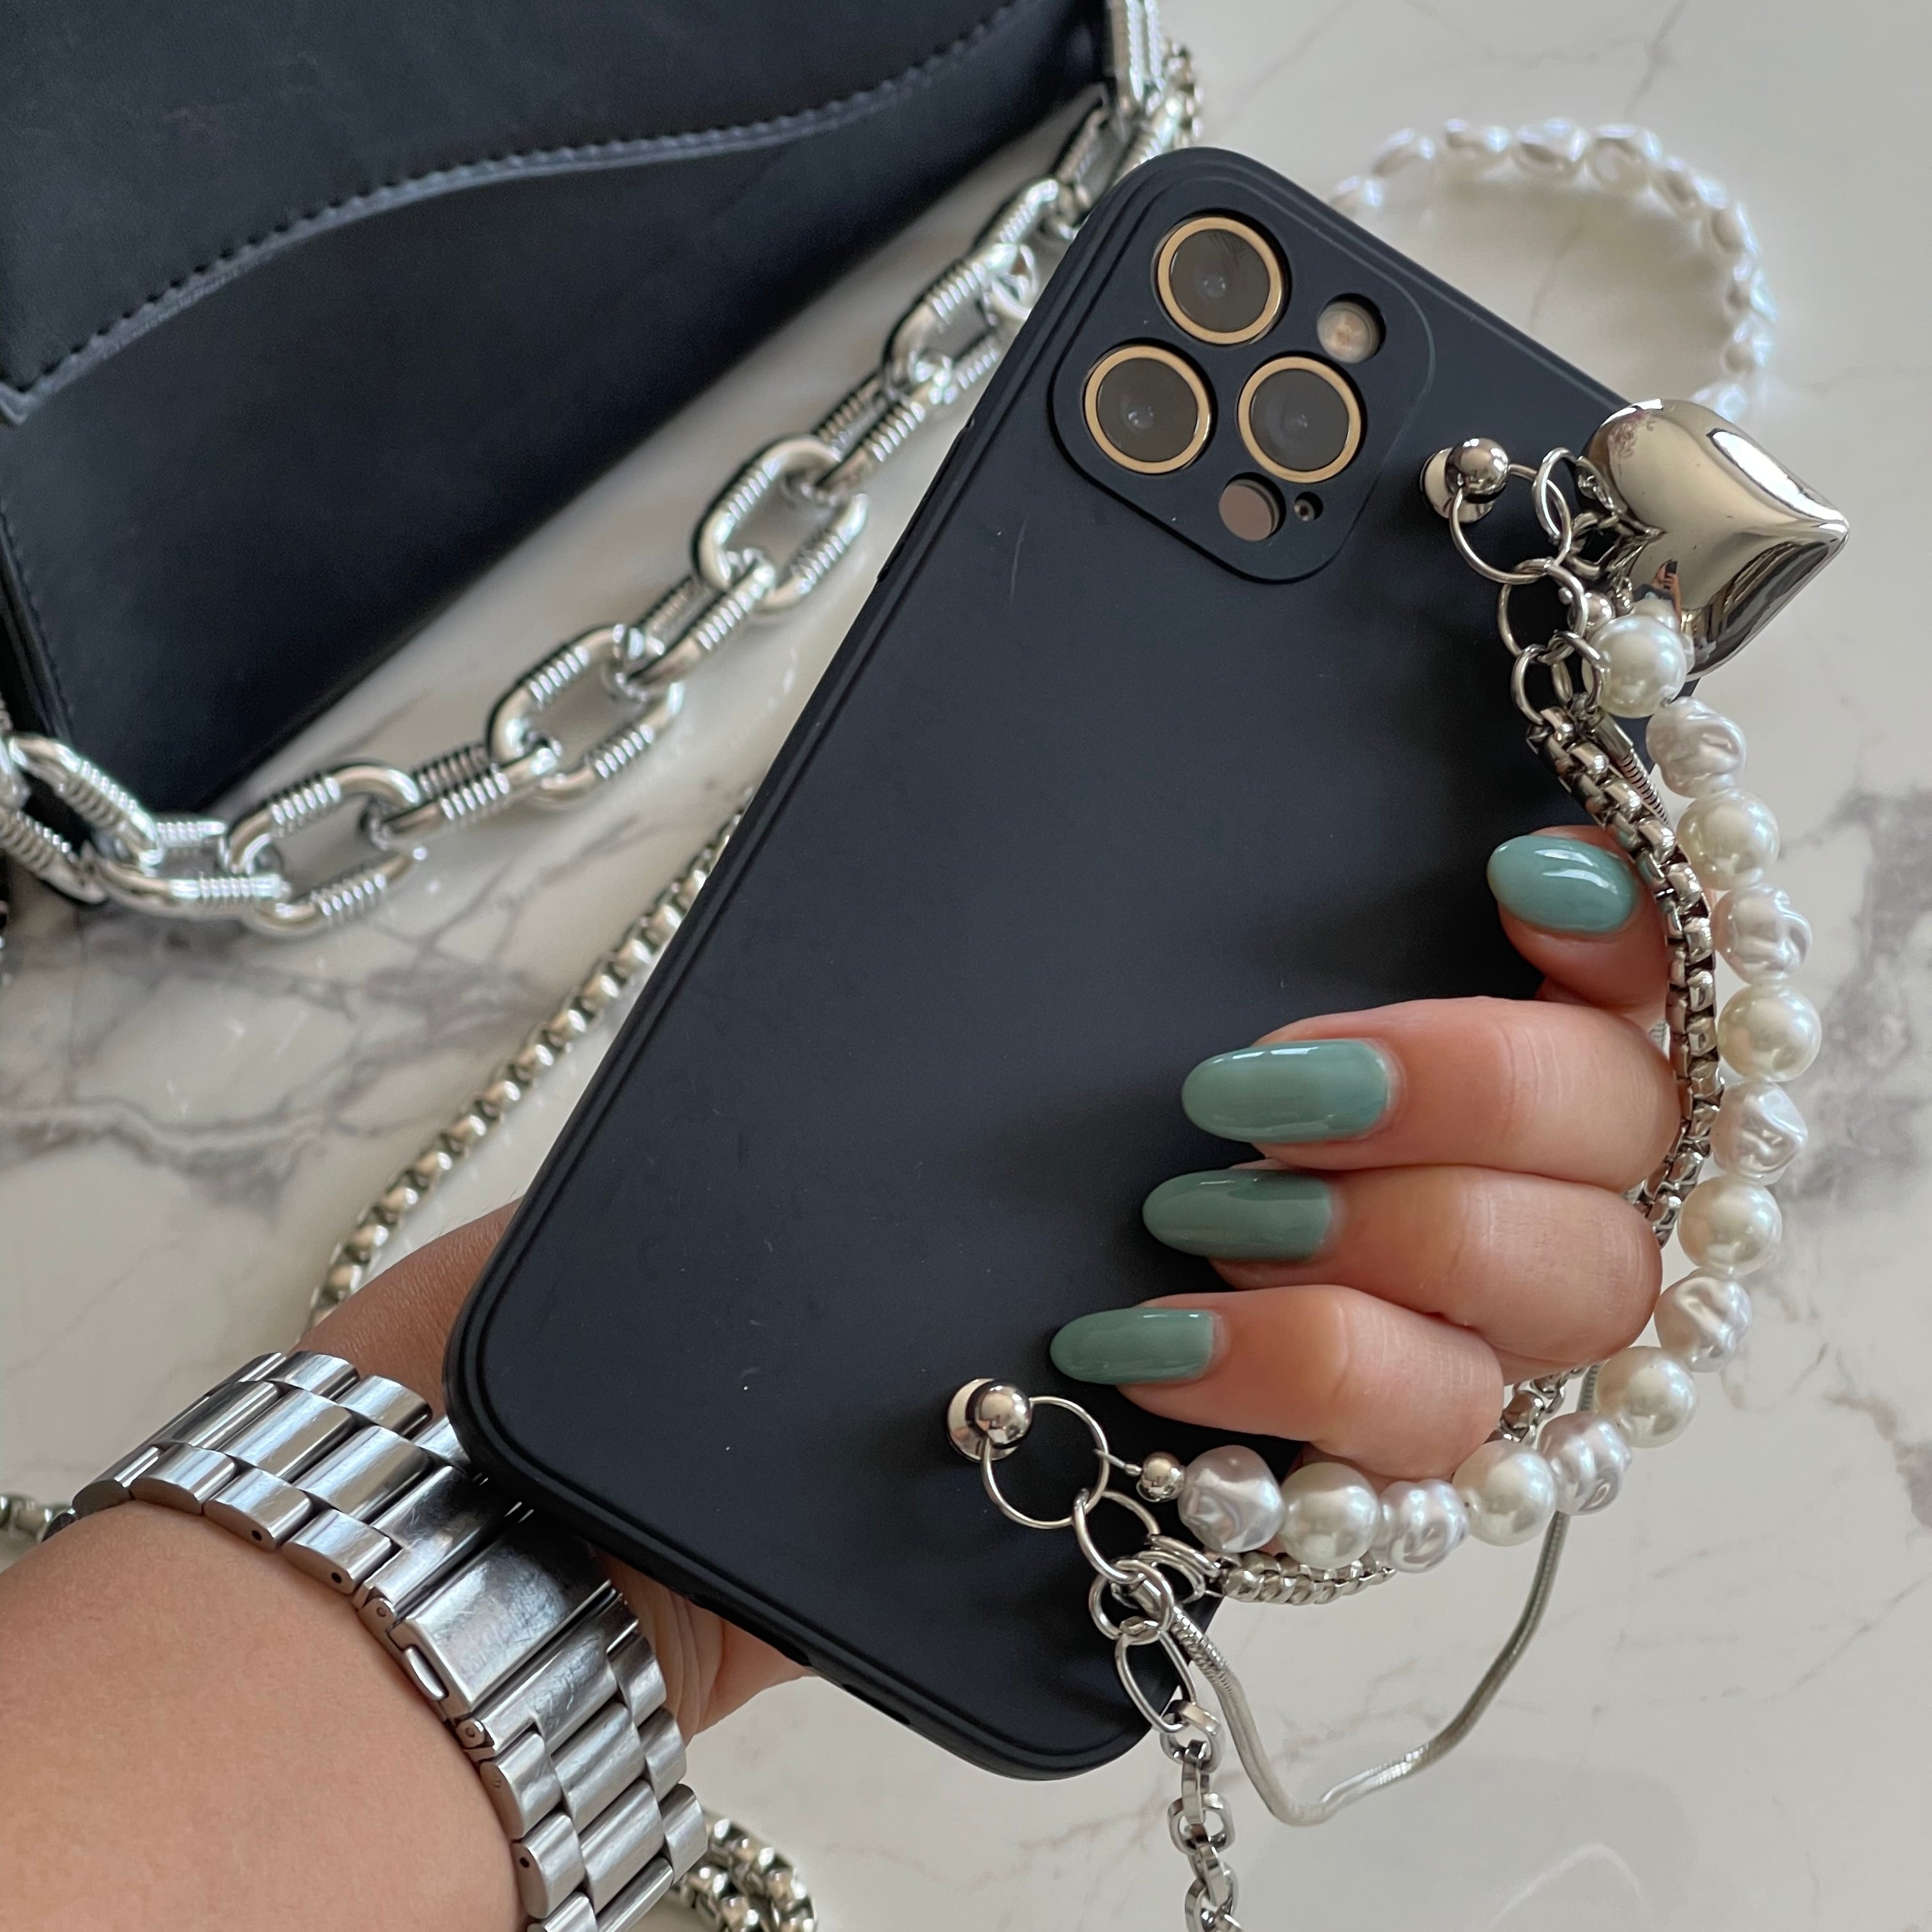 iPhone Case With Chain And Pearls